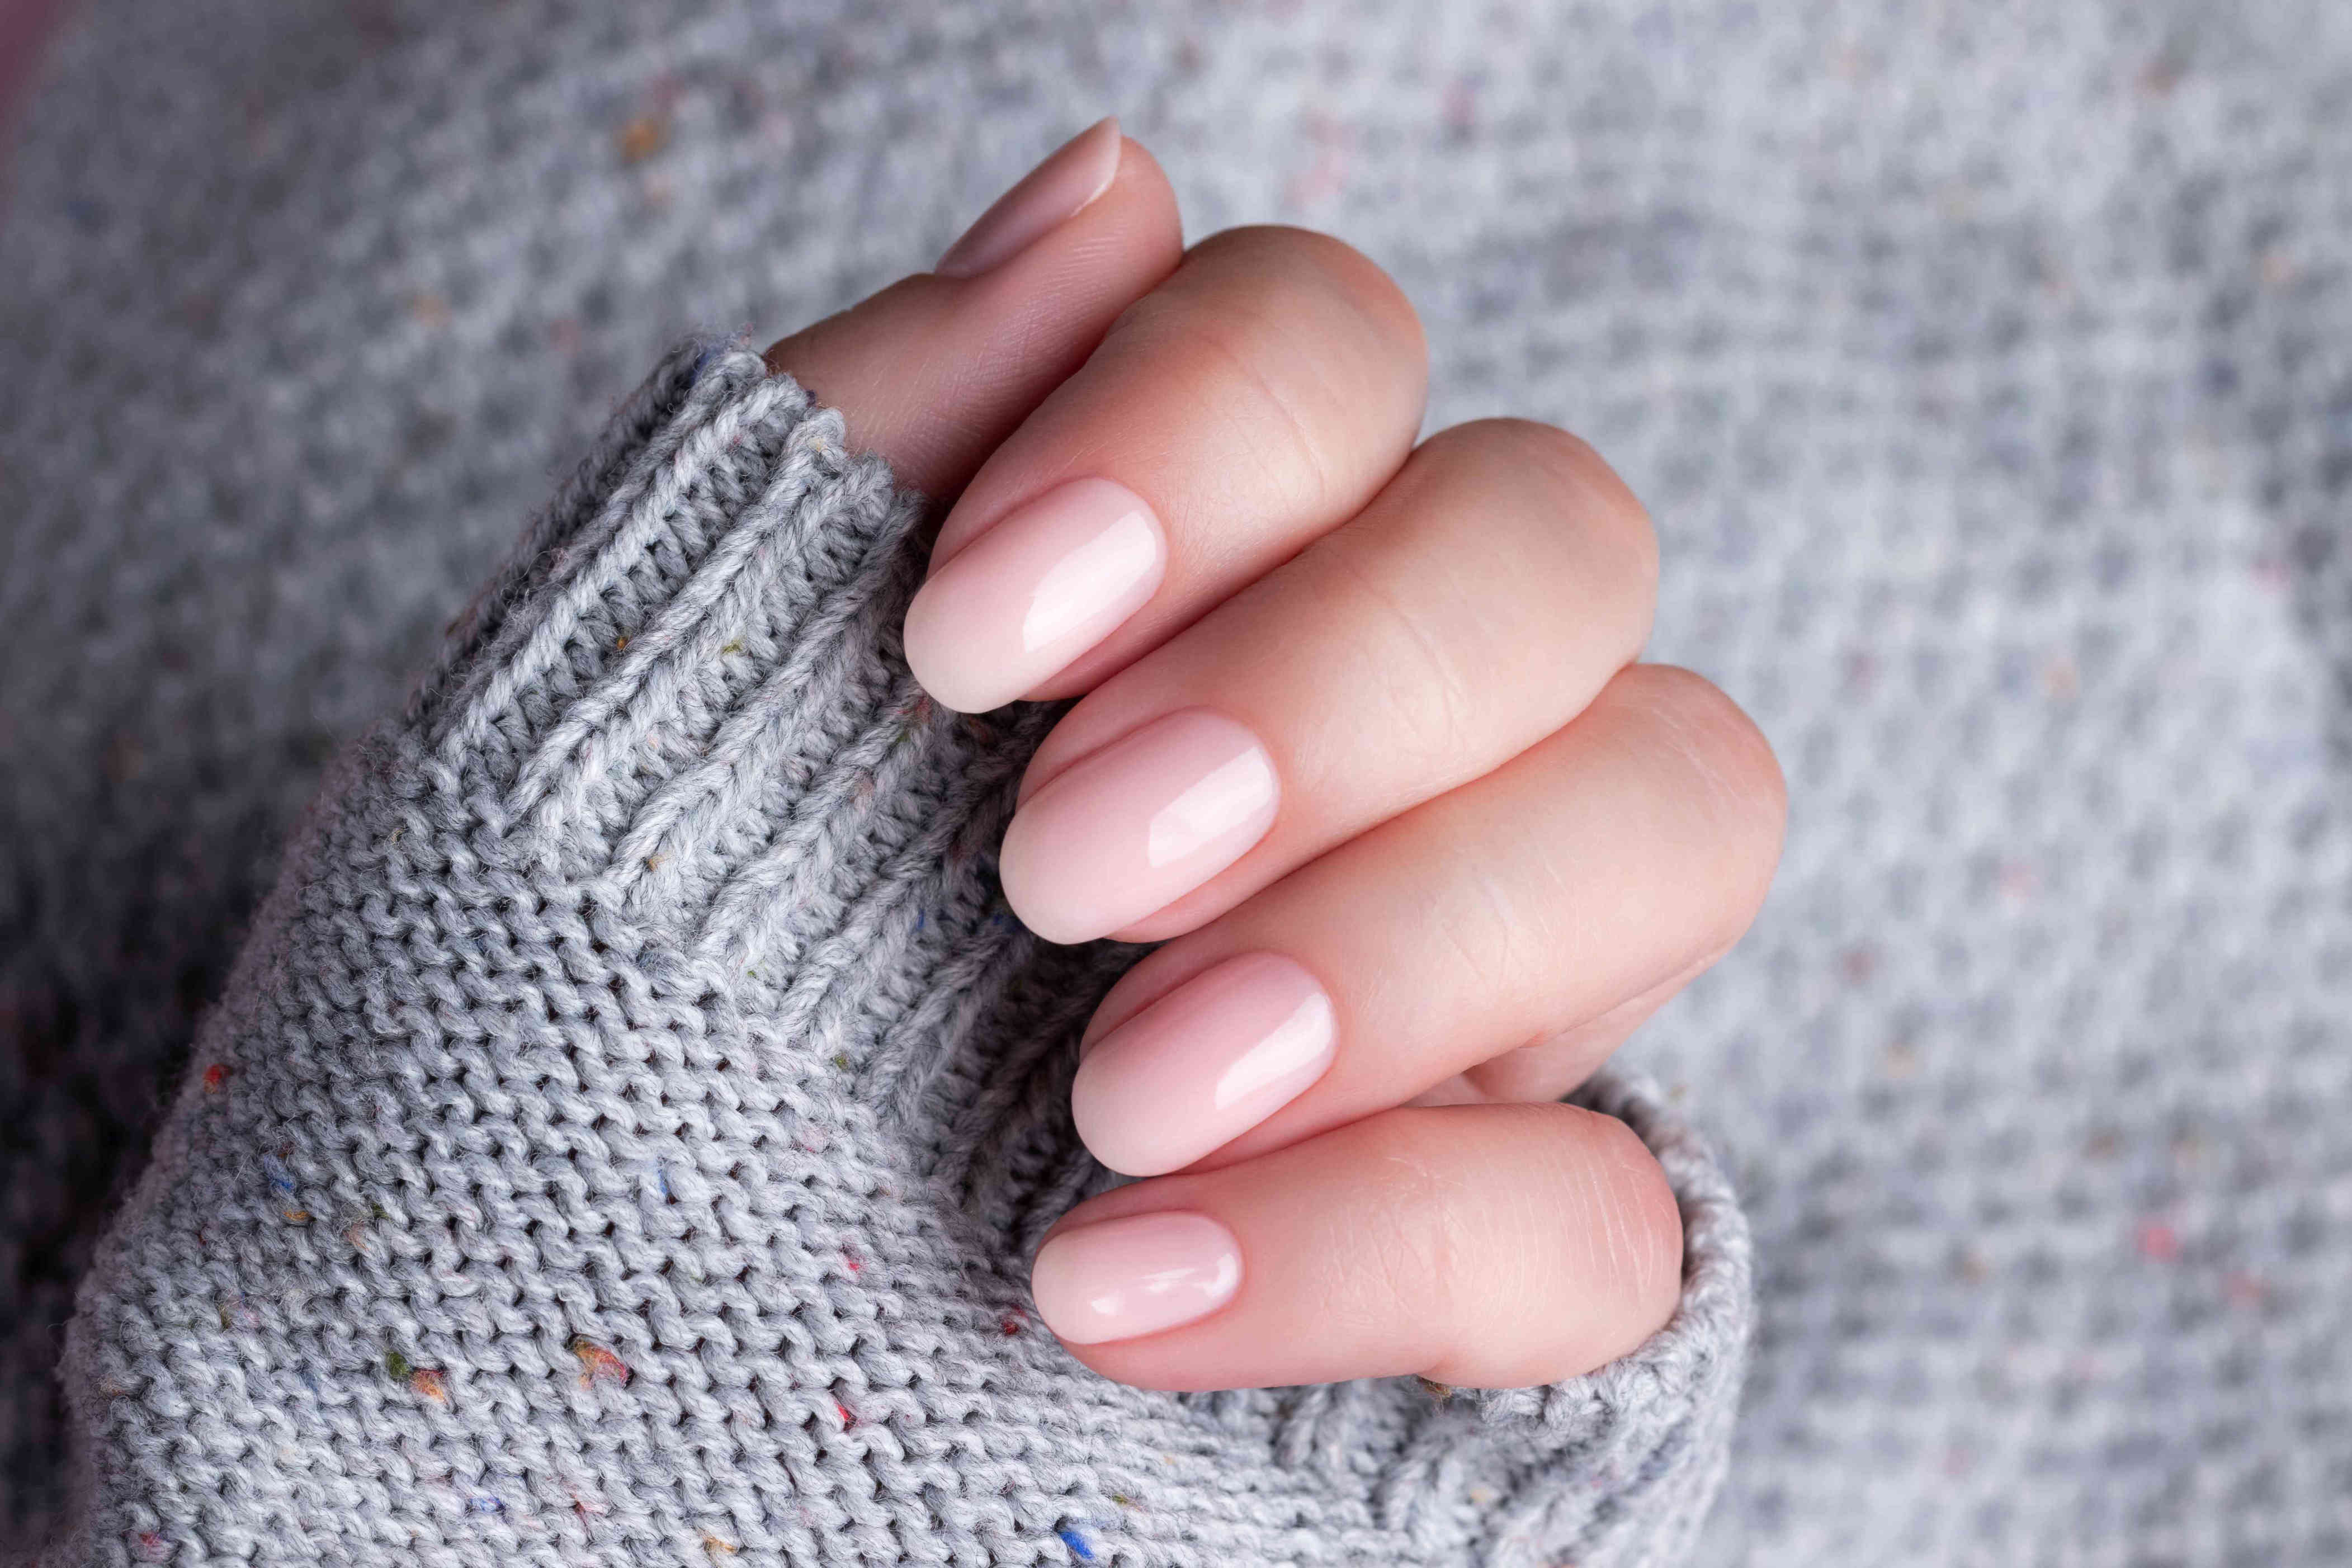 Bubble Bath Nails Is the Perfect Manicure Trend for Minimalists